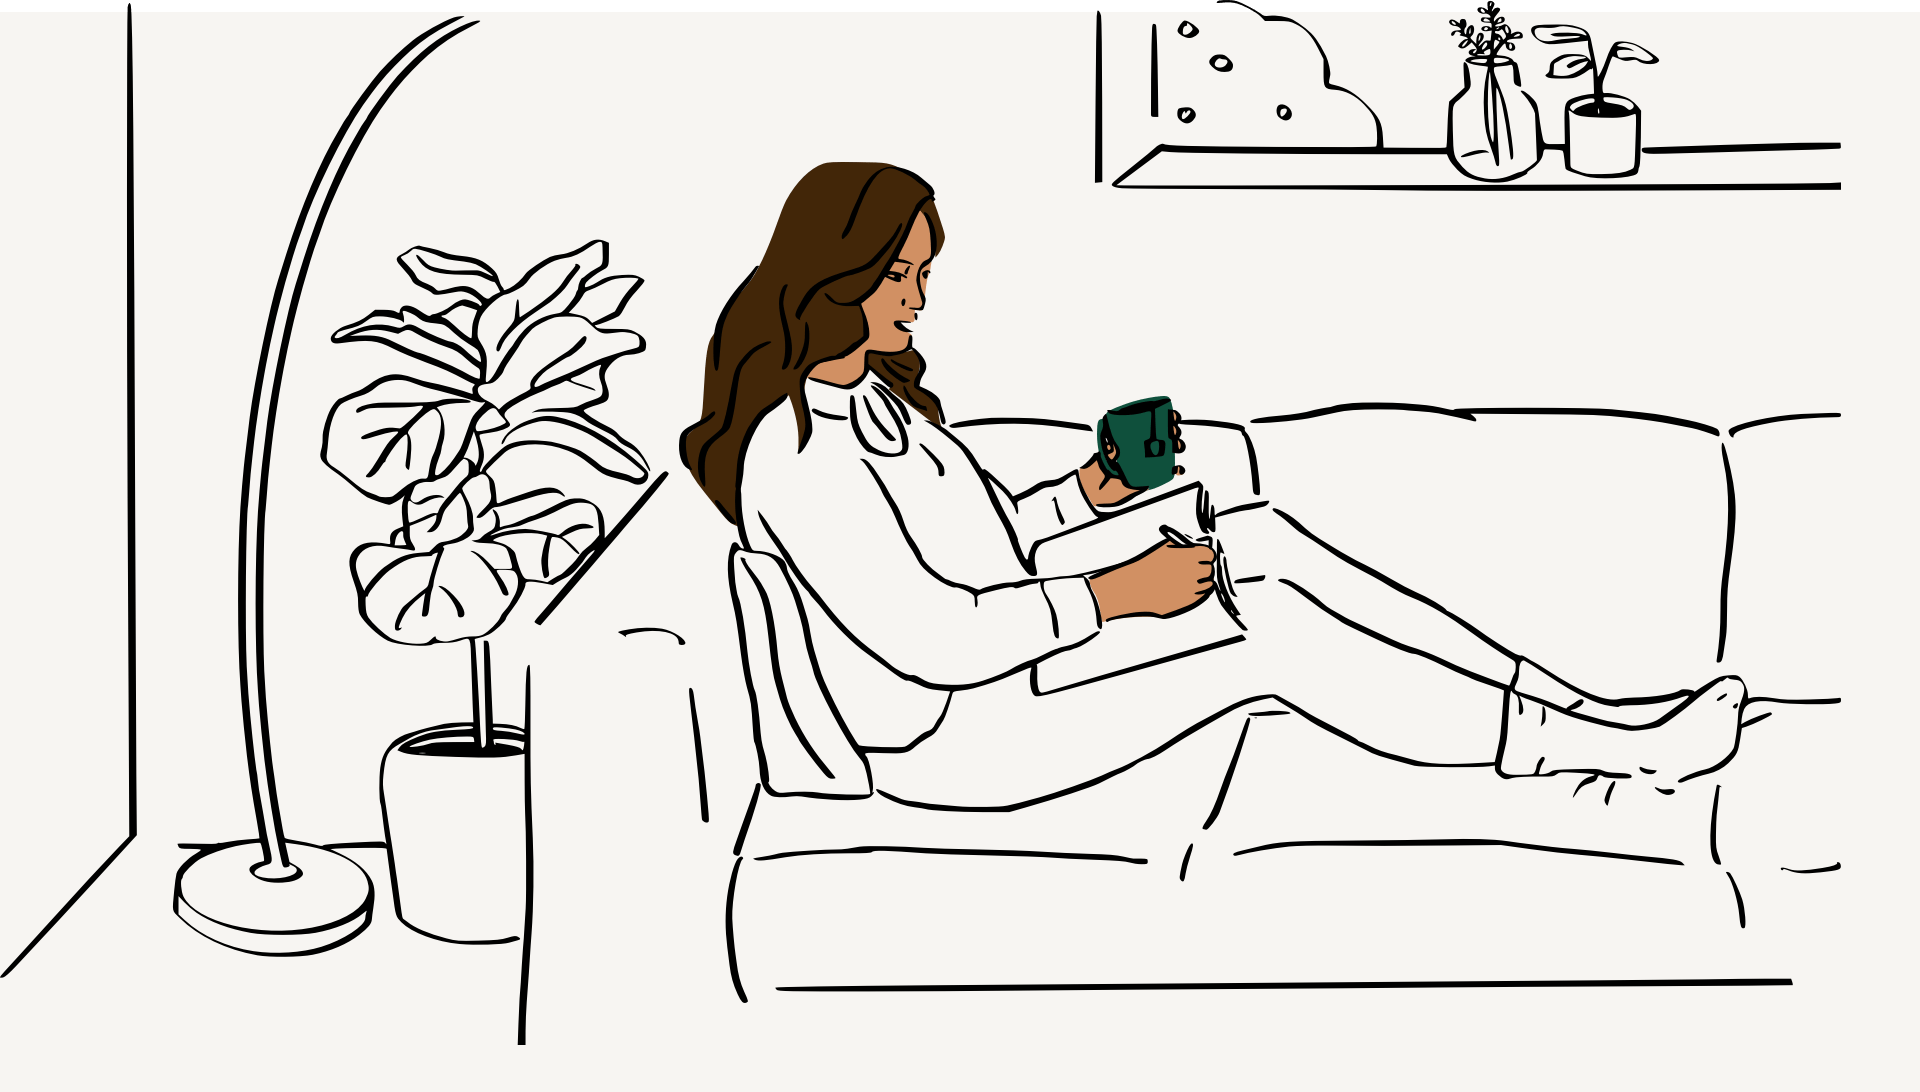 An illustration of a woman sitting on a sofa, holding a mug and writing in a journal